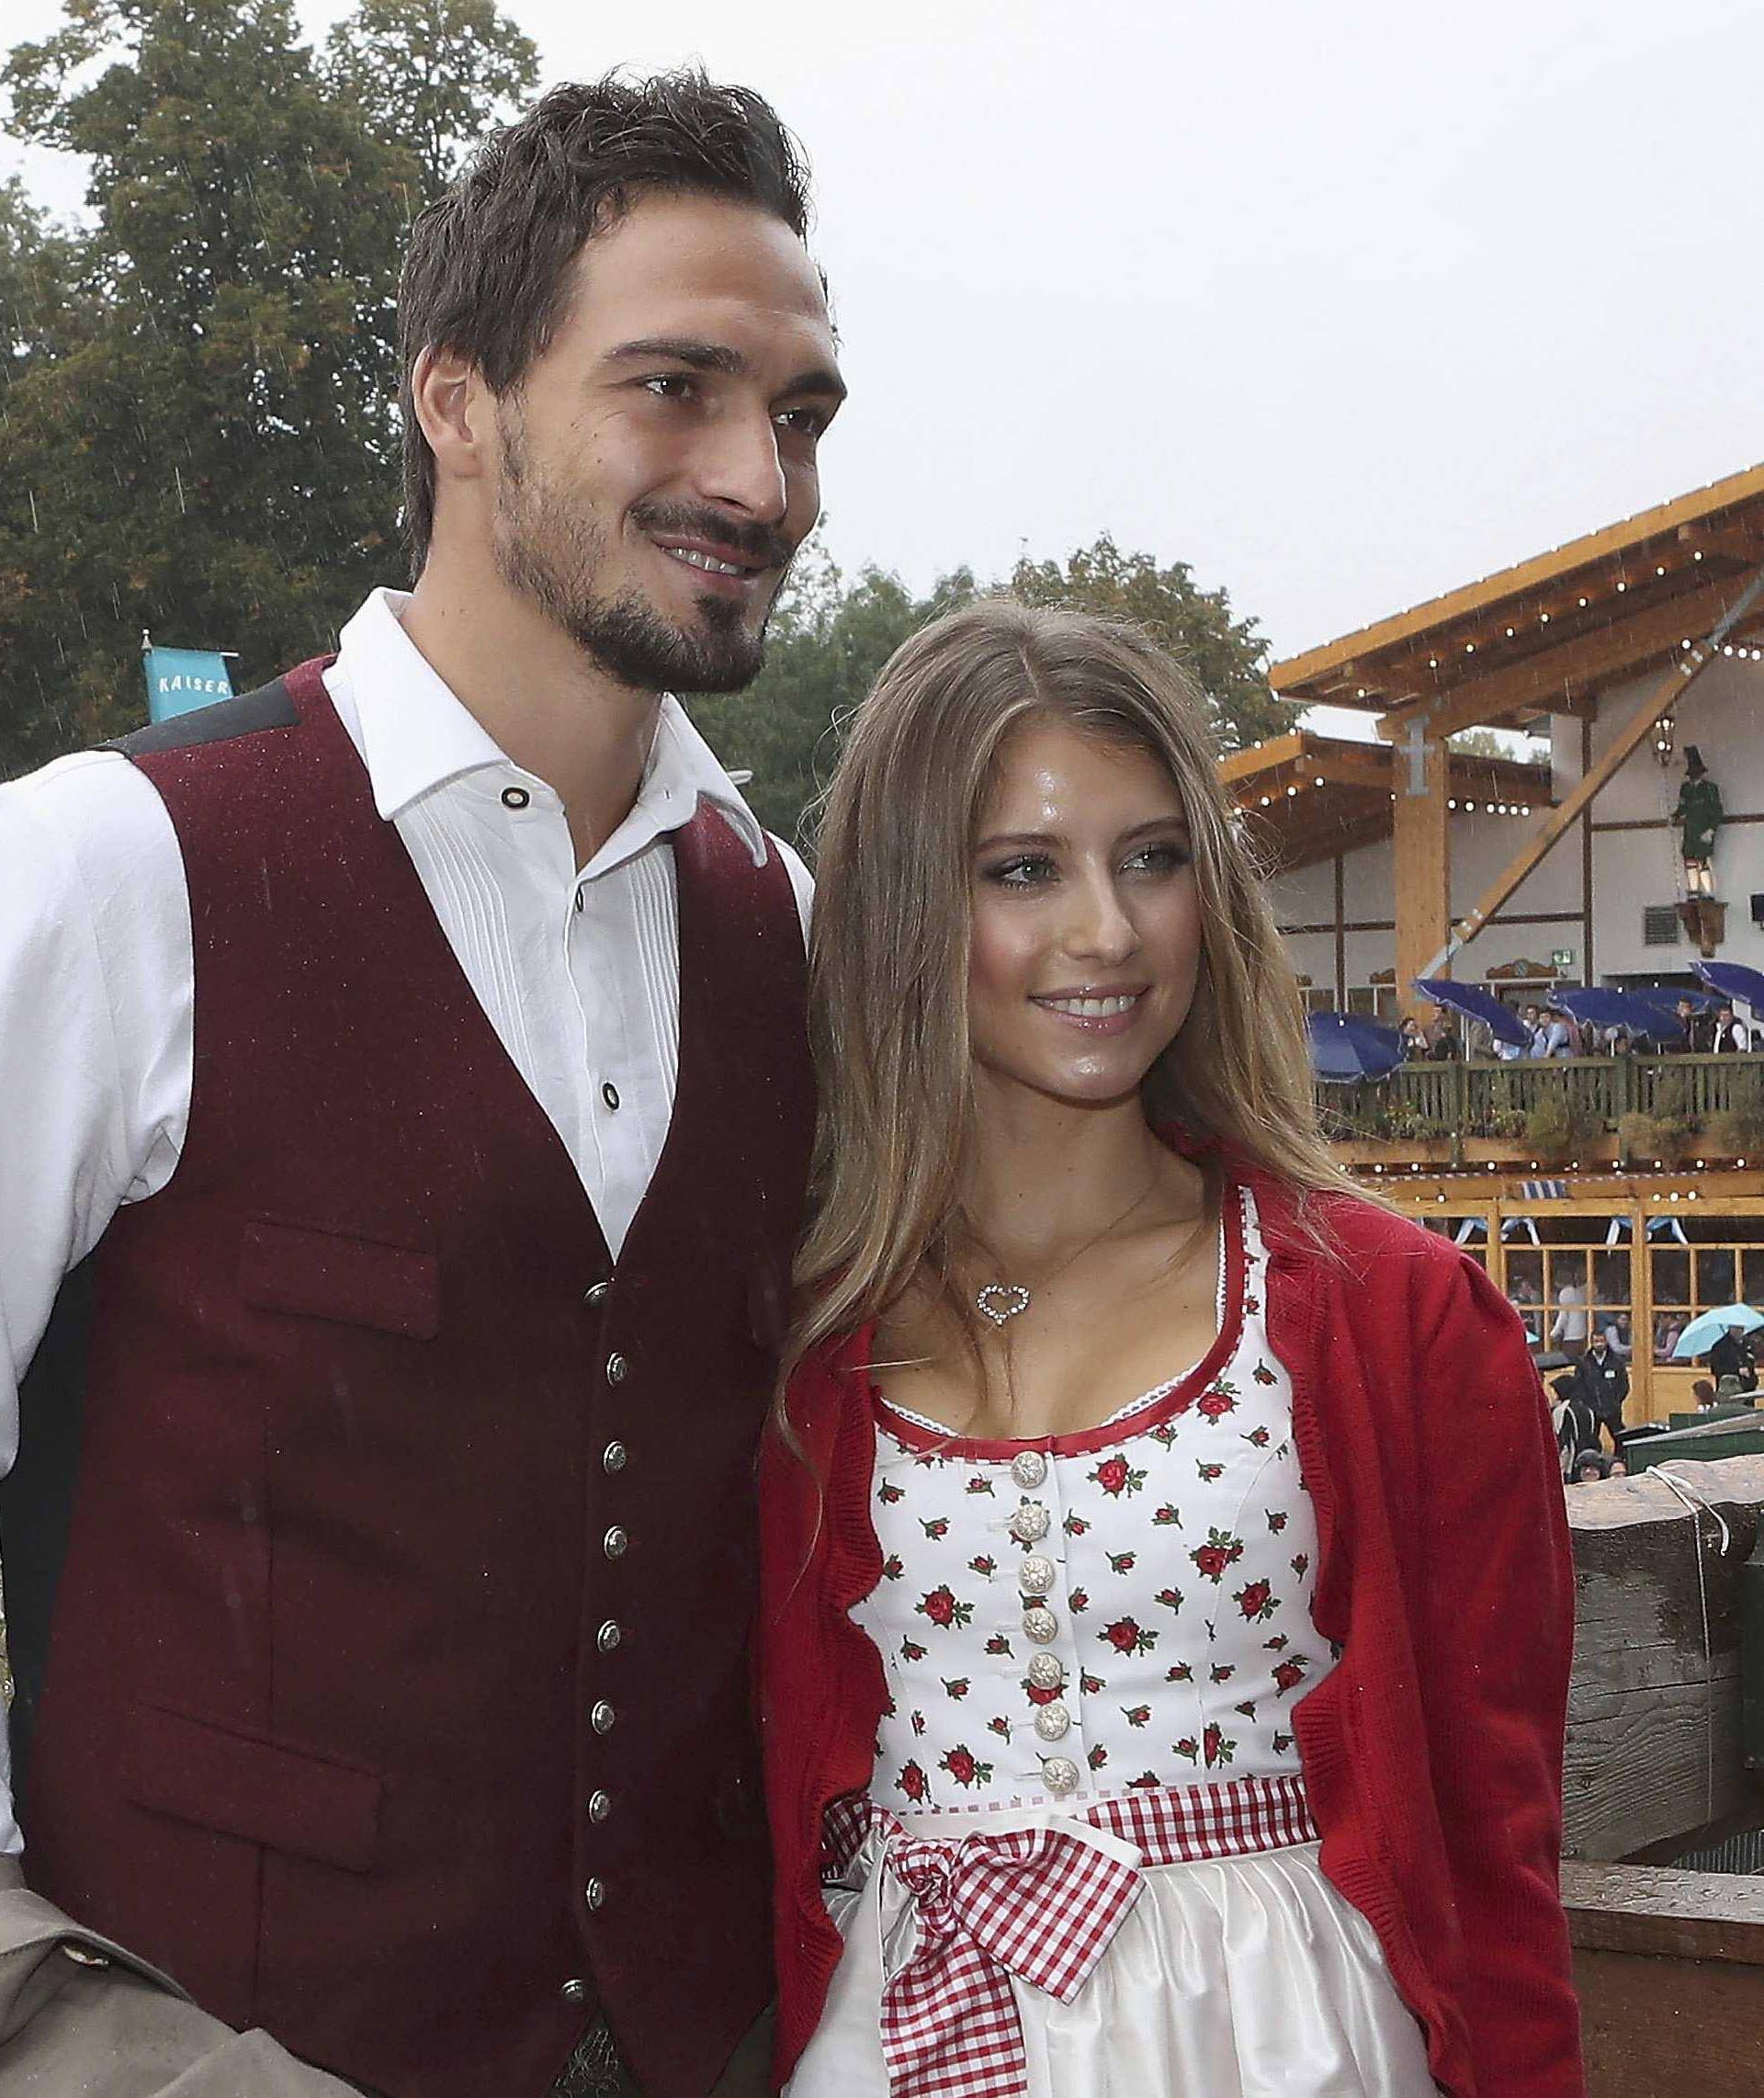 Hummels of FC Bayern Munich and his wife Cathy Fischer pose during their visit at the Oktoberfest in Munich